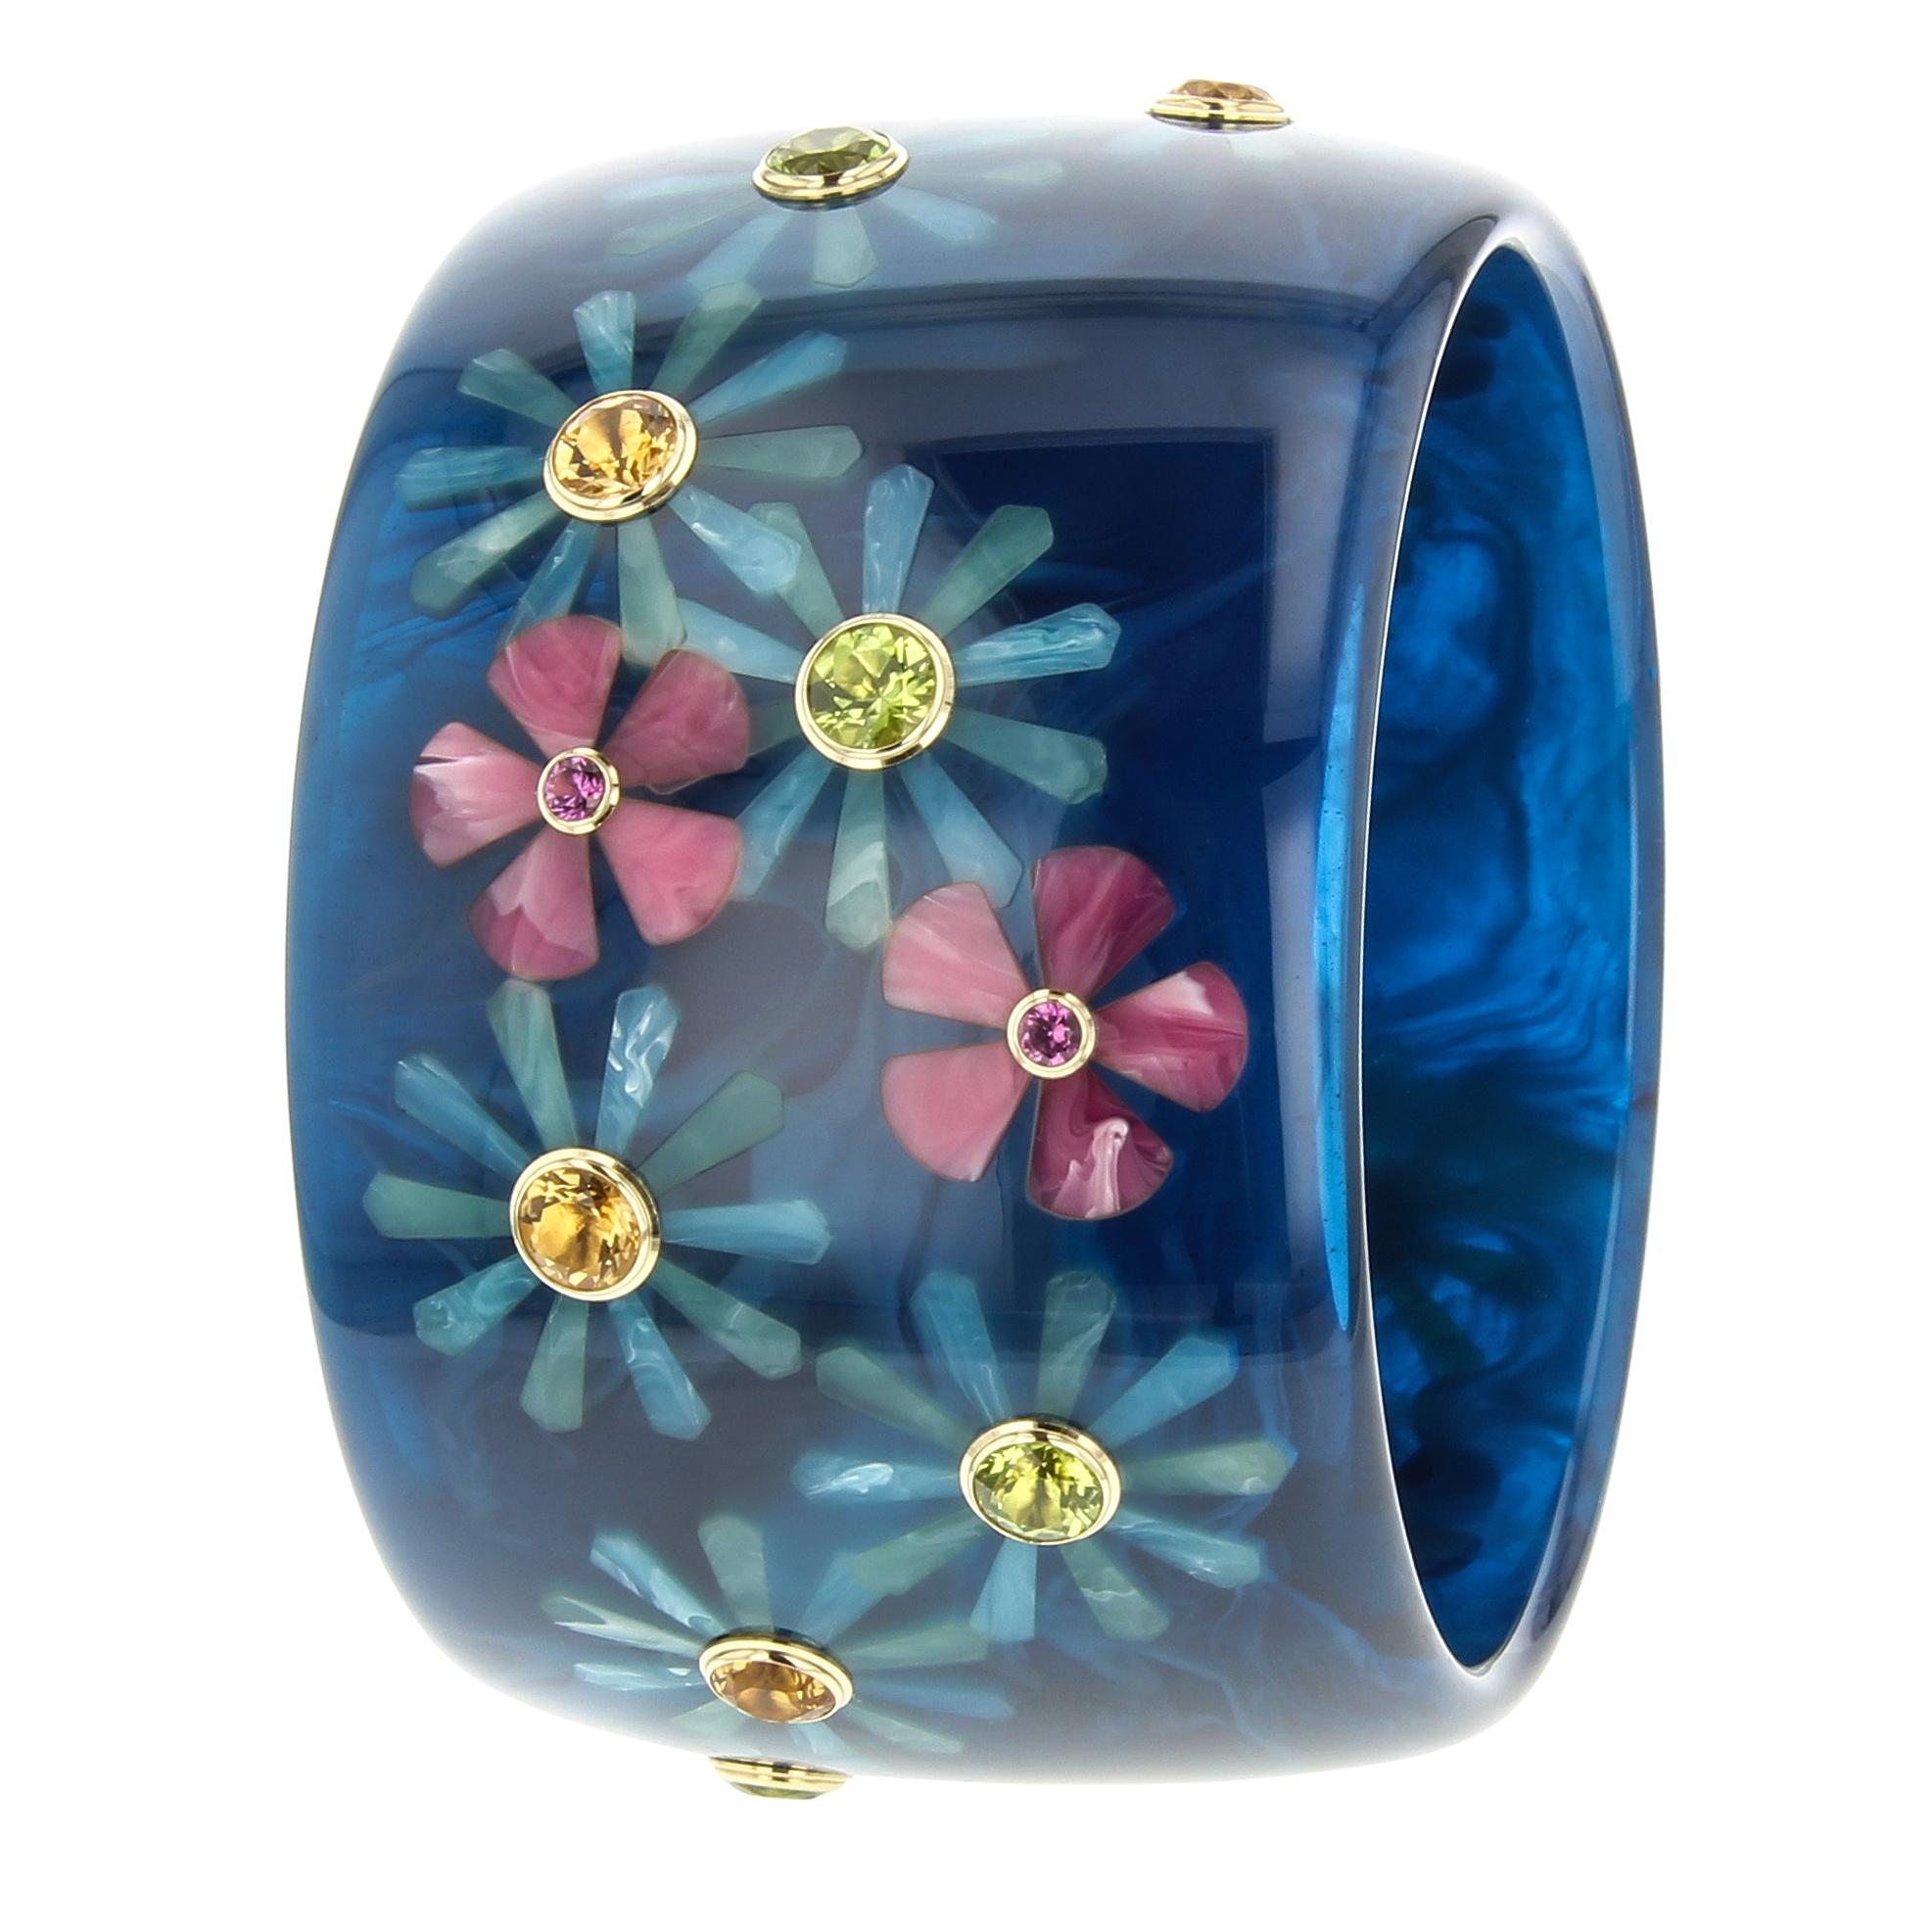 Contemporary Mark Davis Vintage Navy Bakelite Bangle with Floral Inlay and Gemstones in 18k For Sale